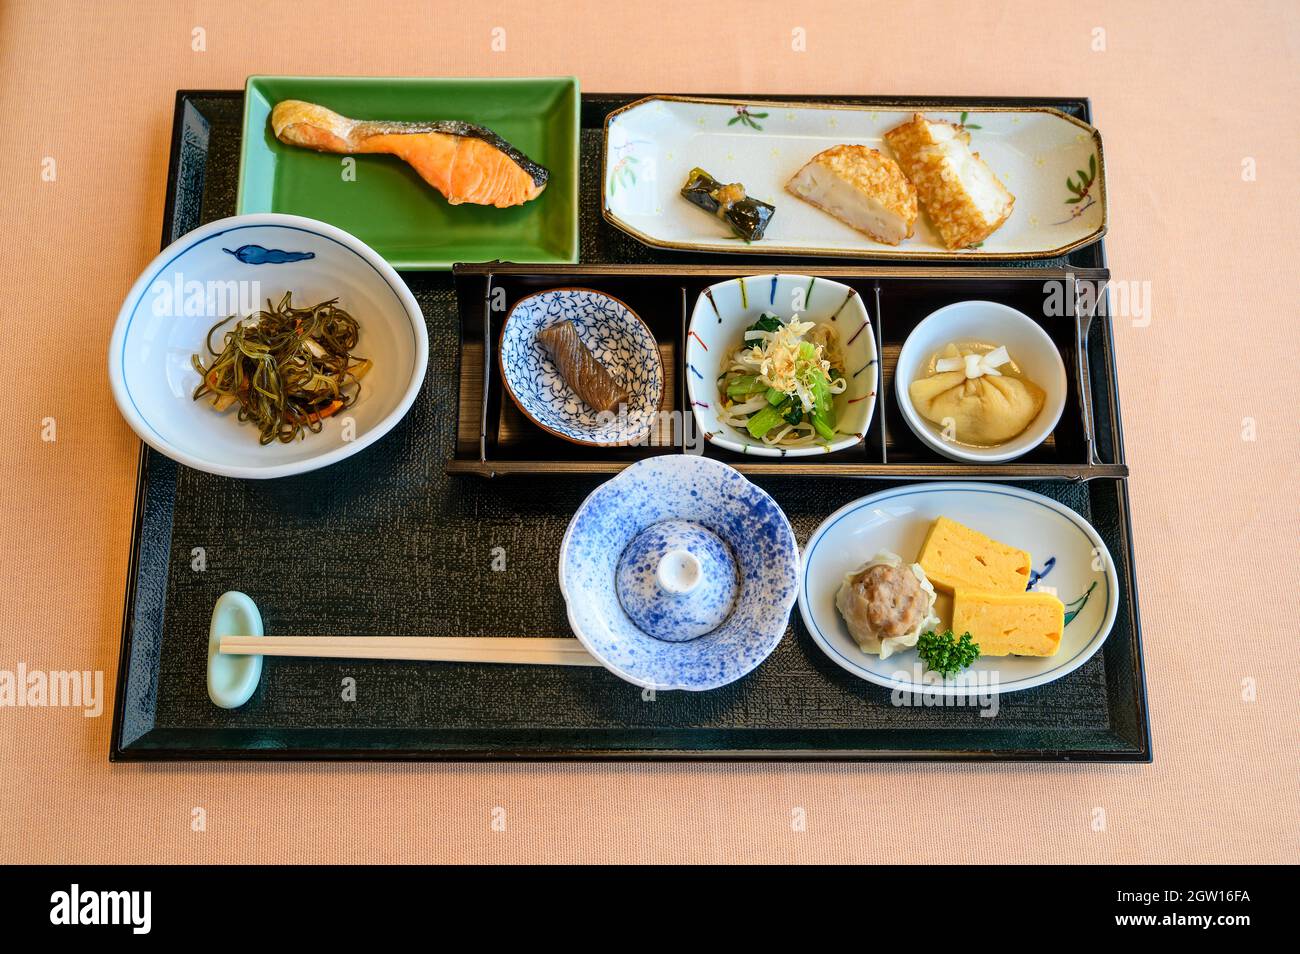 High Angle View Of Japanese Food Served On Table Stock Photo